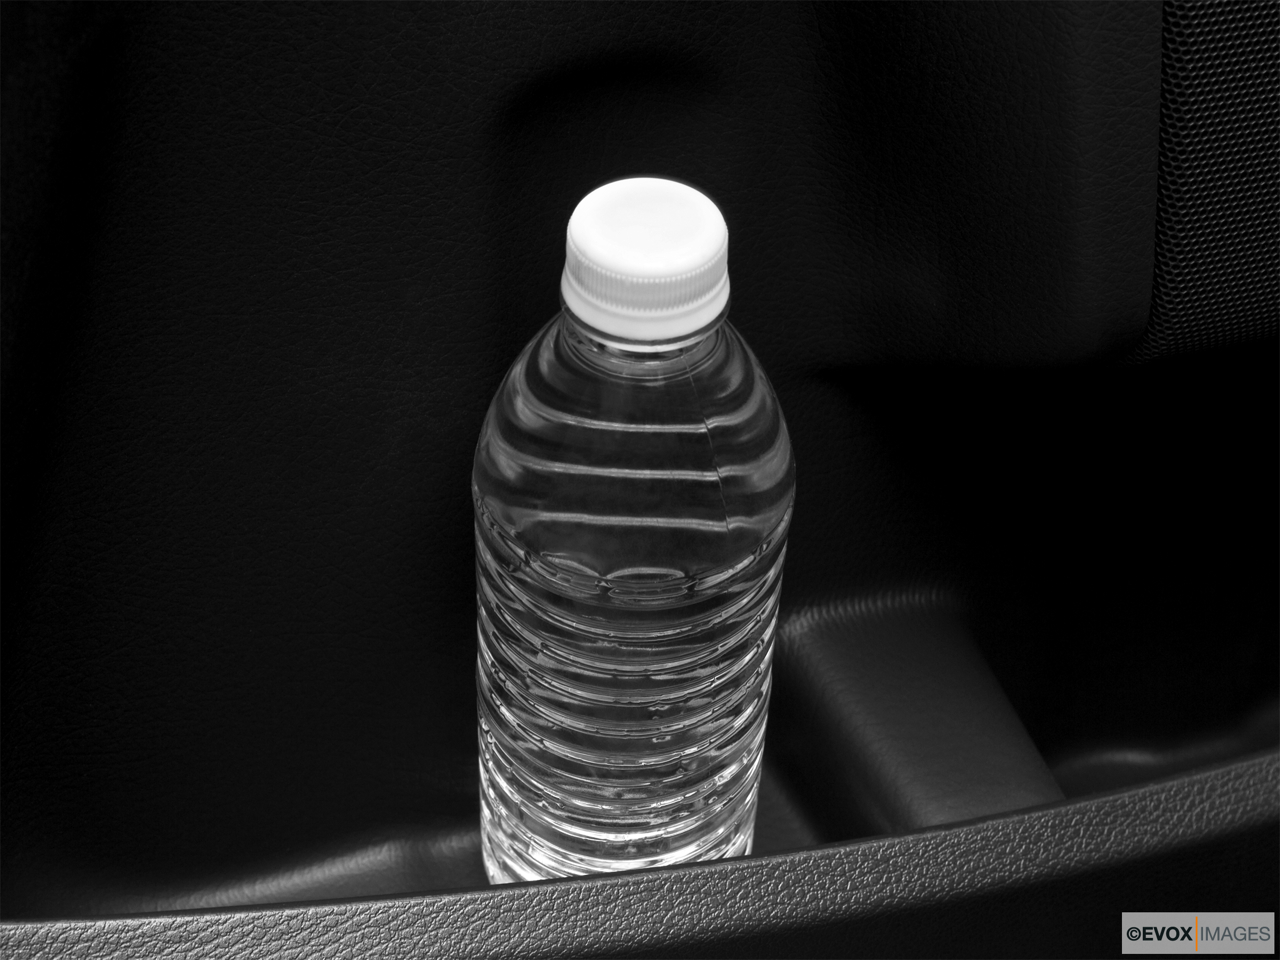 2010 Volvo XC90 3.2 Second row side cup holder with coffee prop, or second row door cup holder with water bottle. 